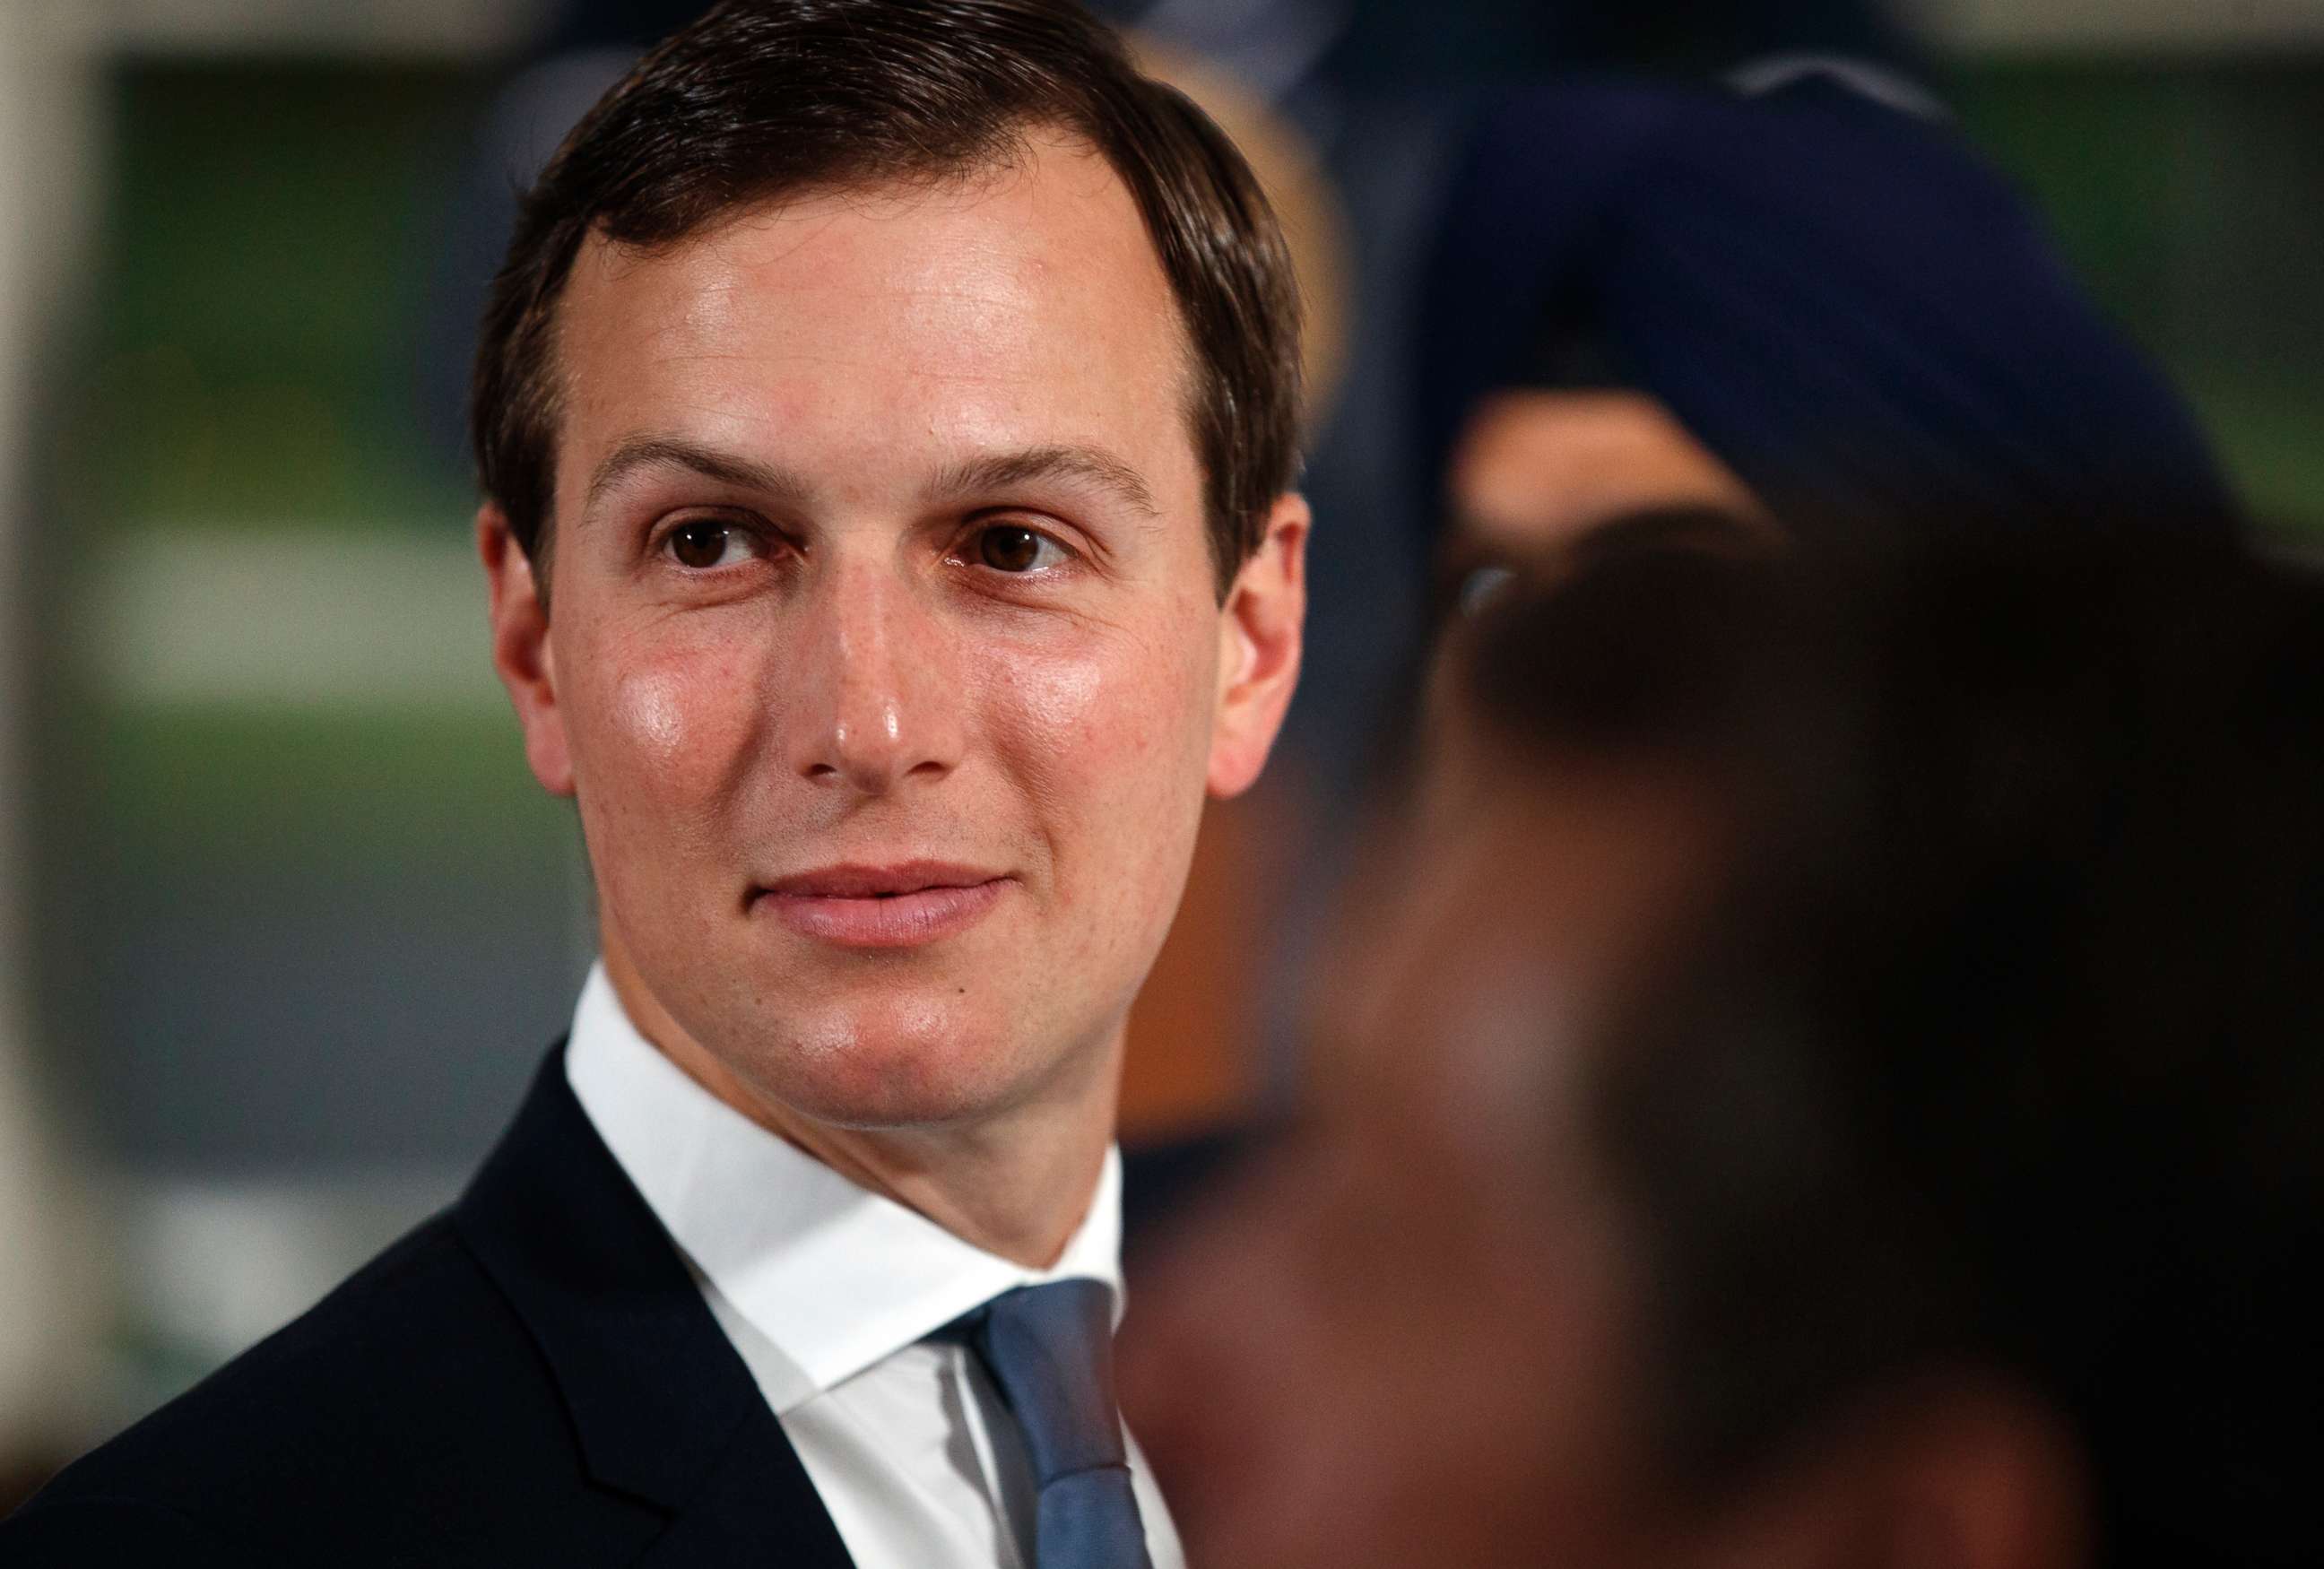 PHOTO: Senior adviser to President Donald Trump, Jared Kushner, attends a dinner meeting with President Donald Trump and business leaders, Aug. 7, 2018, at Trump National Golf Club in Bedminster, N.J.